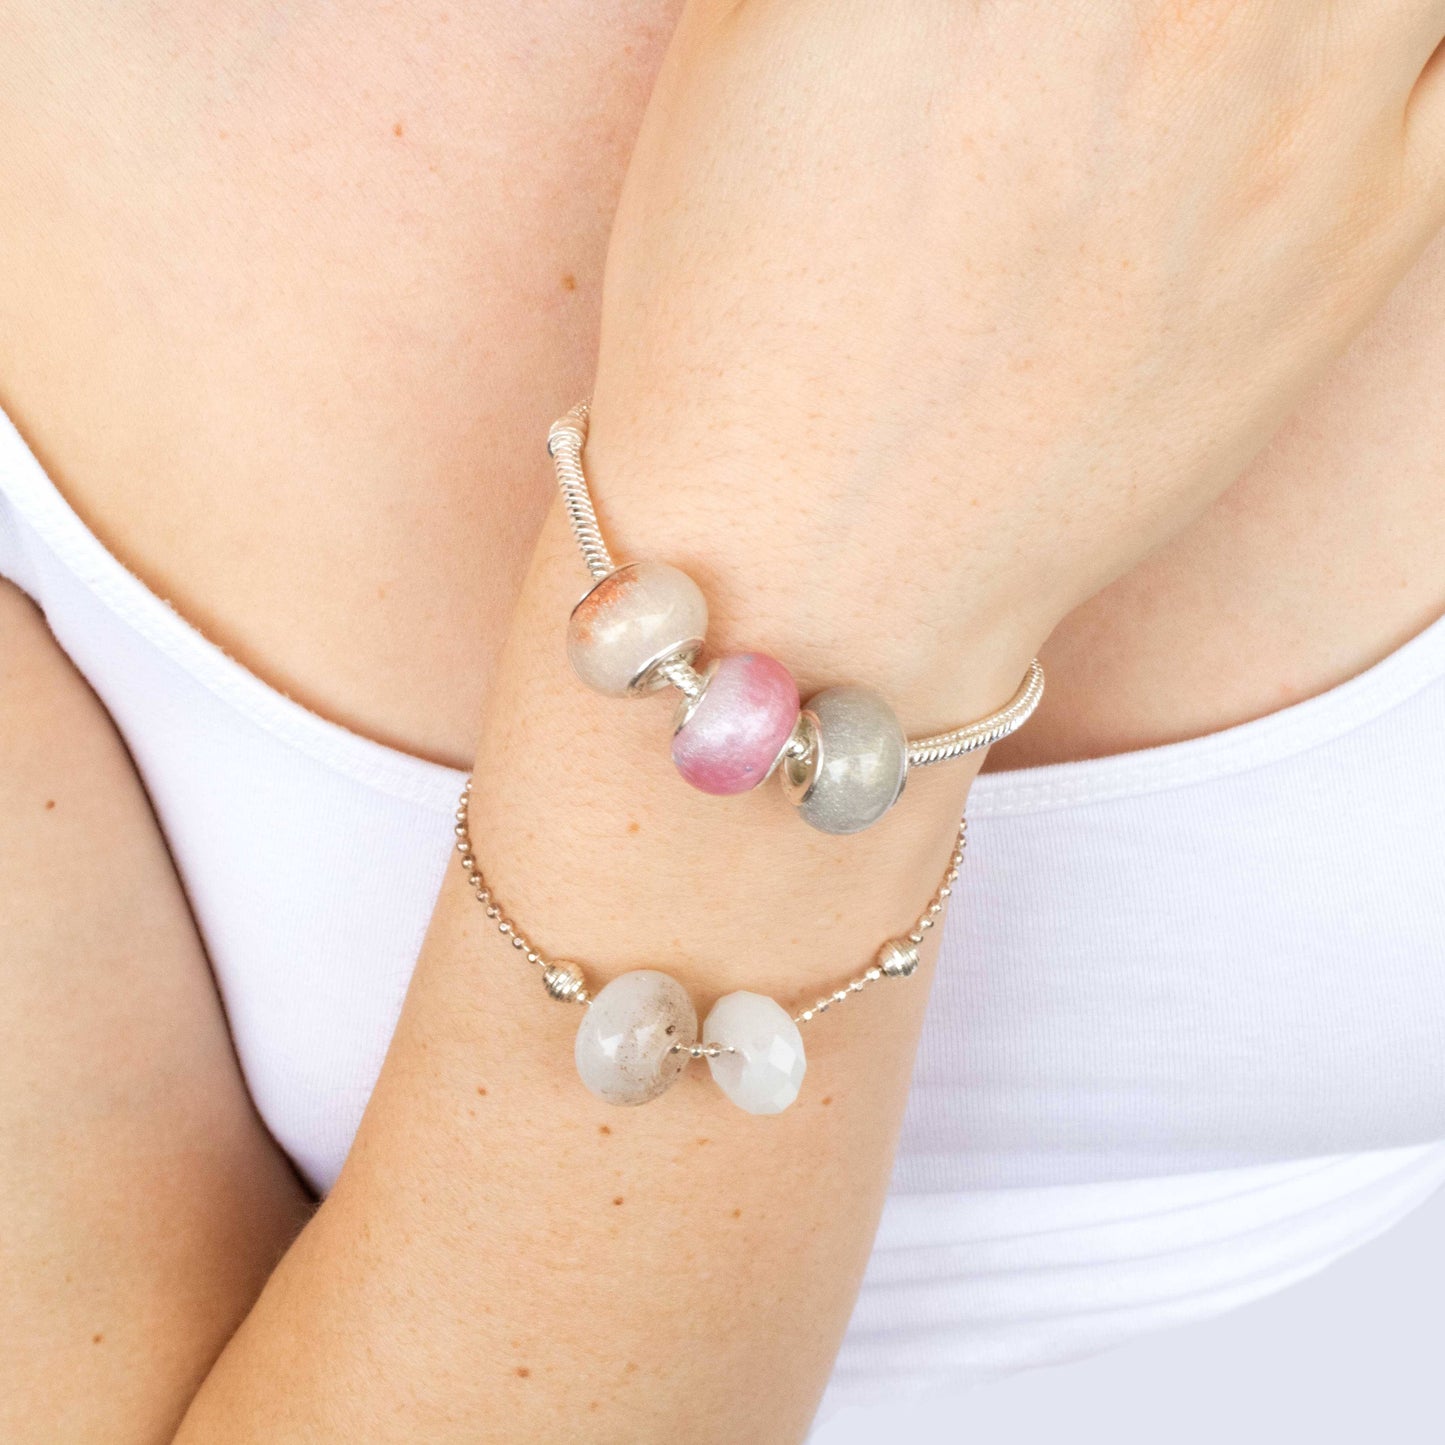 A keepsake bead or Charm made with Breastmilk, Hair, Ashes 